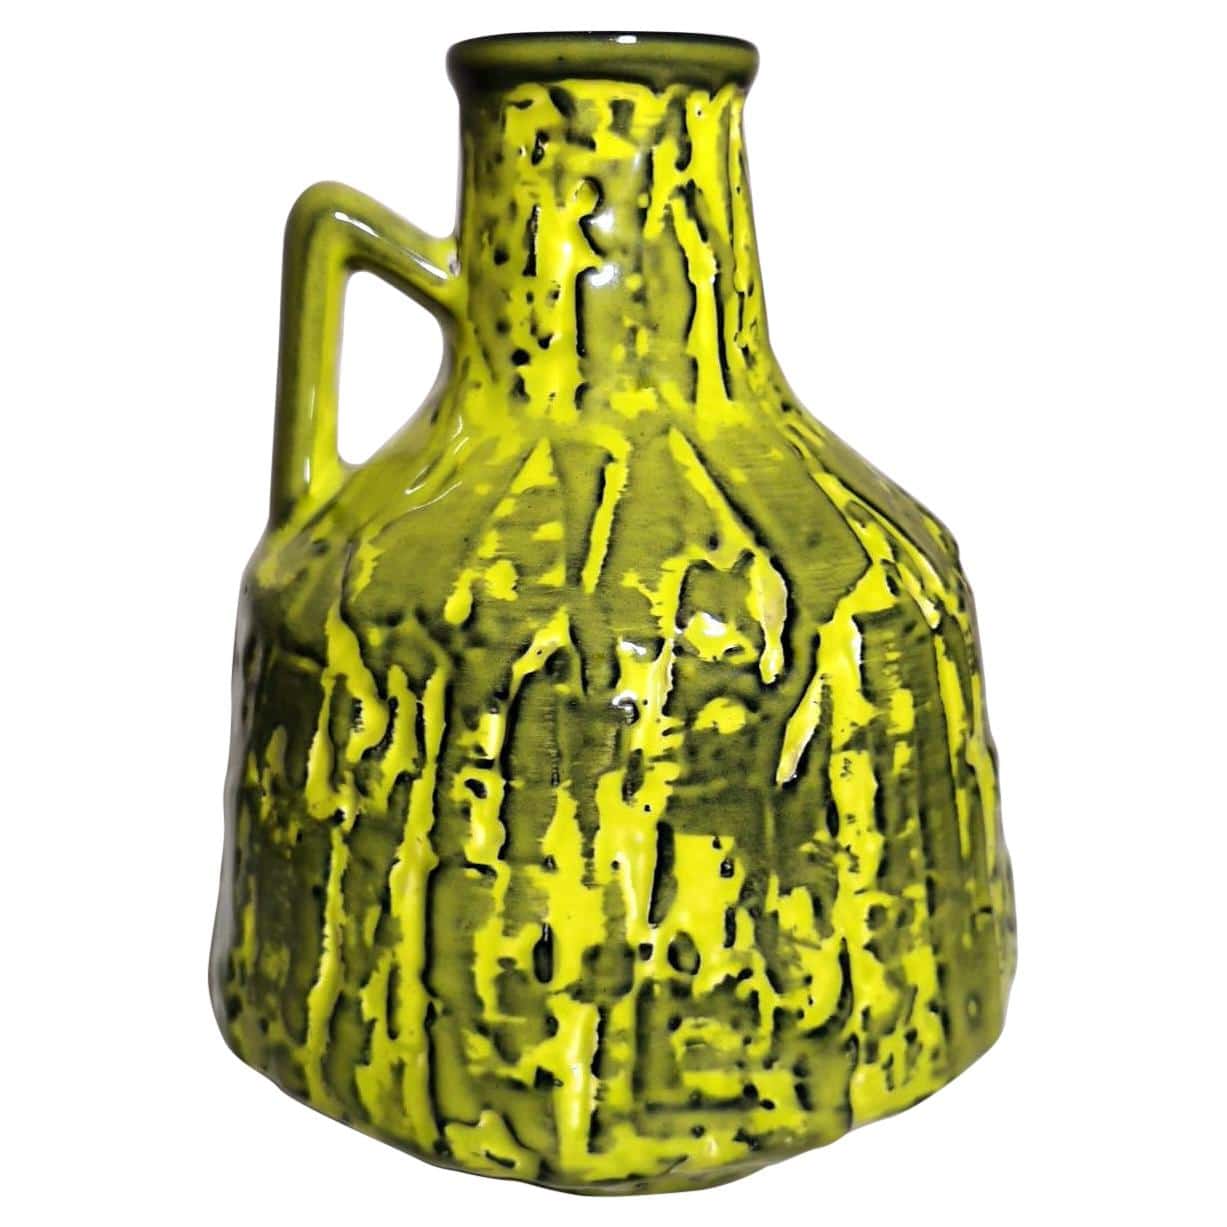 Green-and-yellow late-20th-century German jug vase